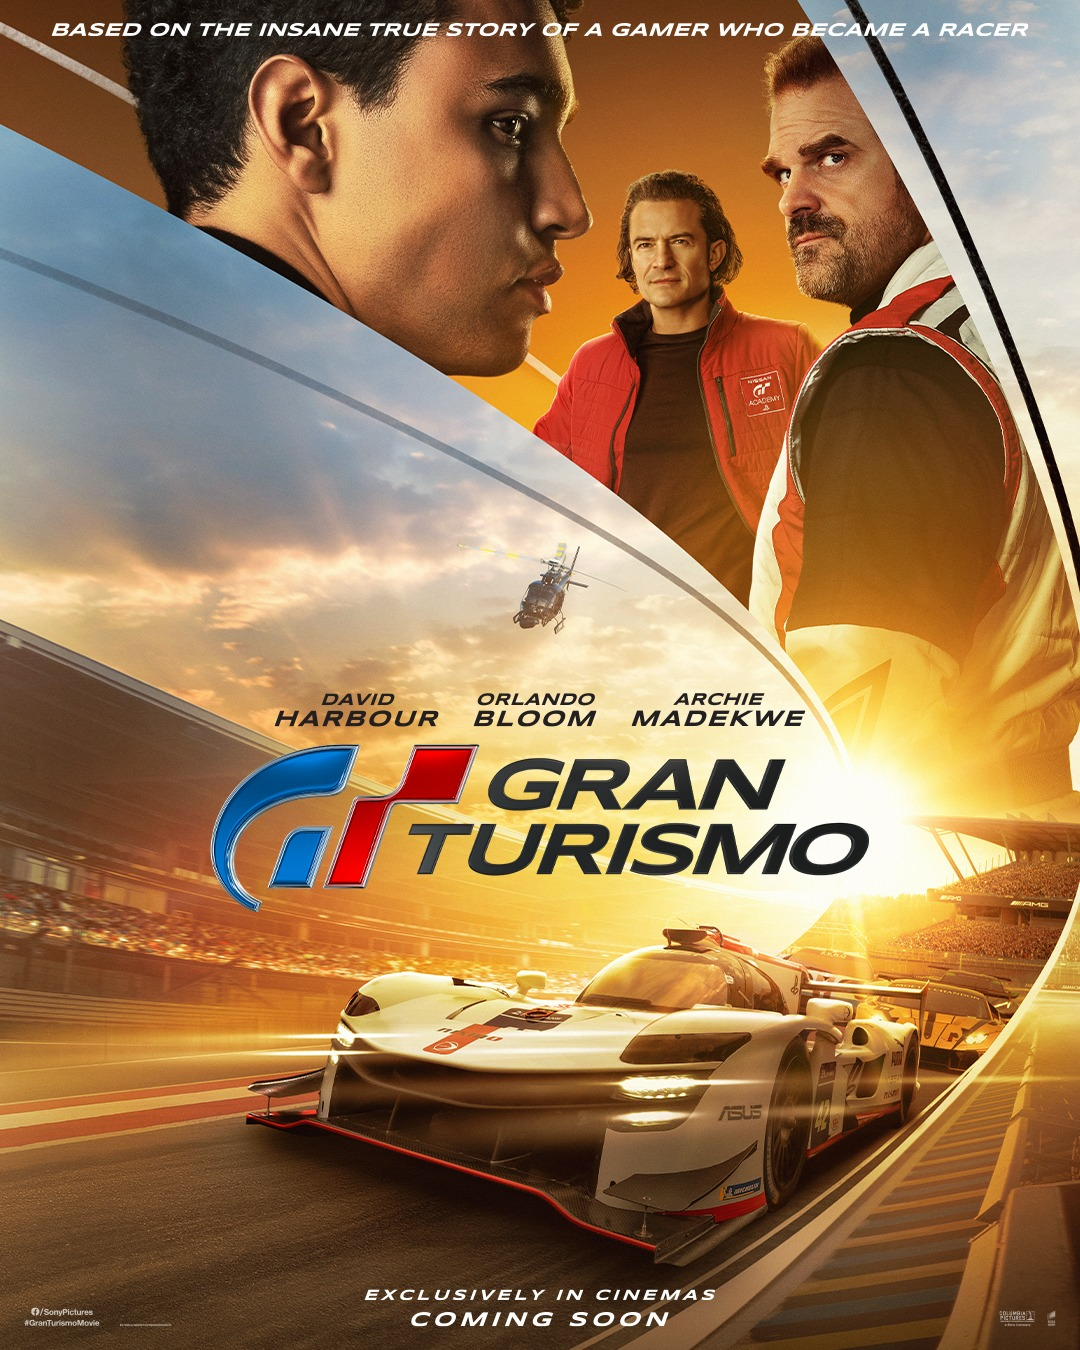 WATCH: "GRAN TURISMO" the Movie Revs Up Our Interest in Latest Trailer